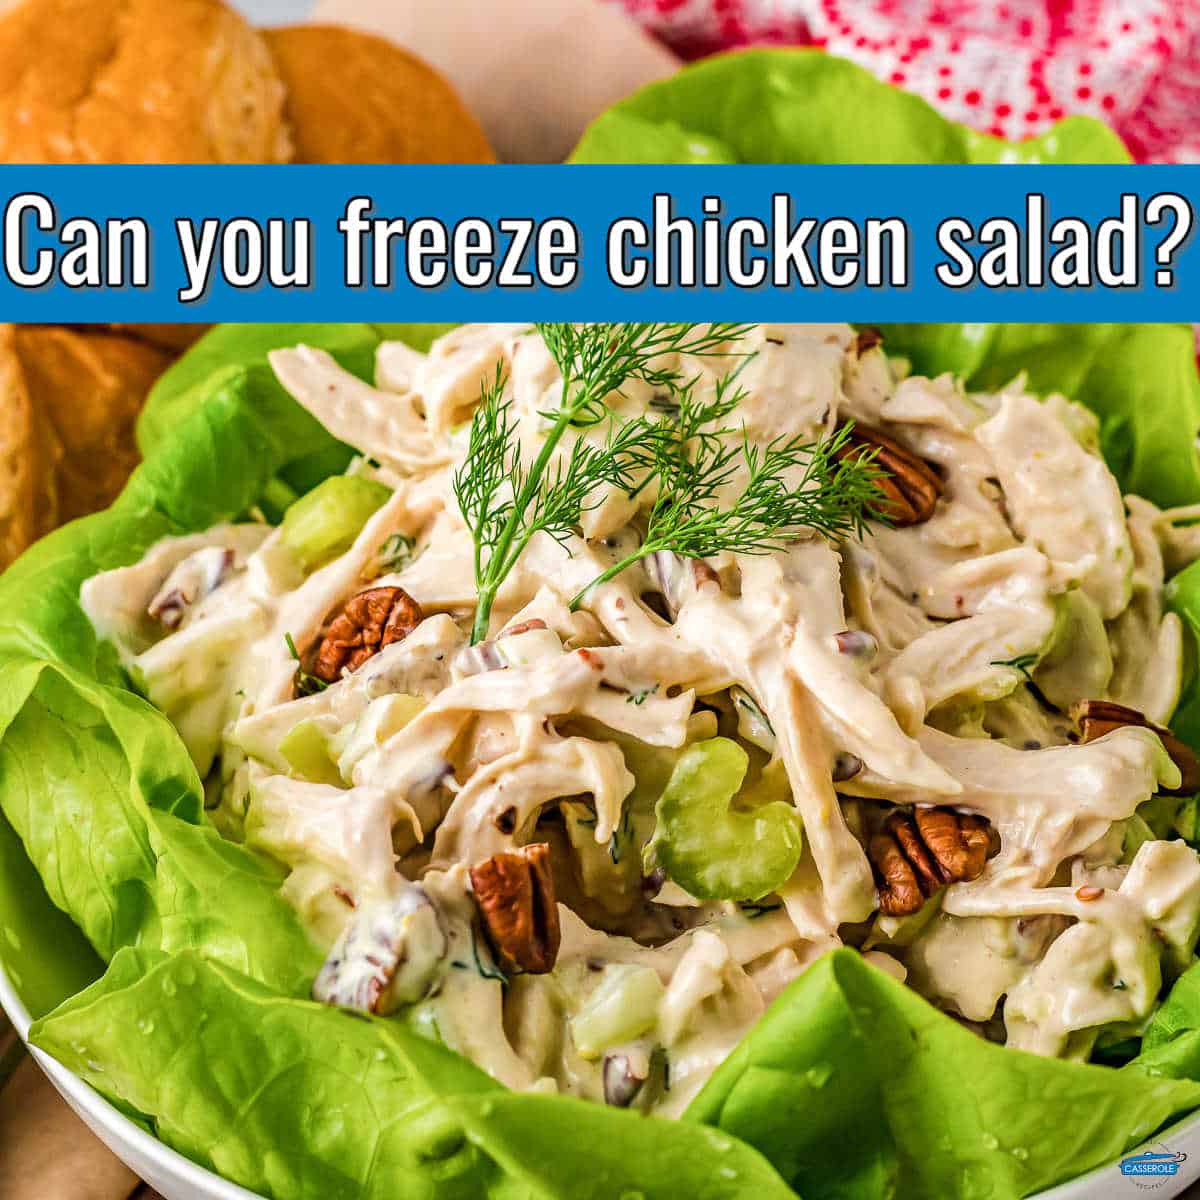 green lettuce with a scoop of chicken salad with blue stripe and text "can you freeze chicken salad?"